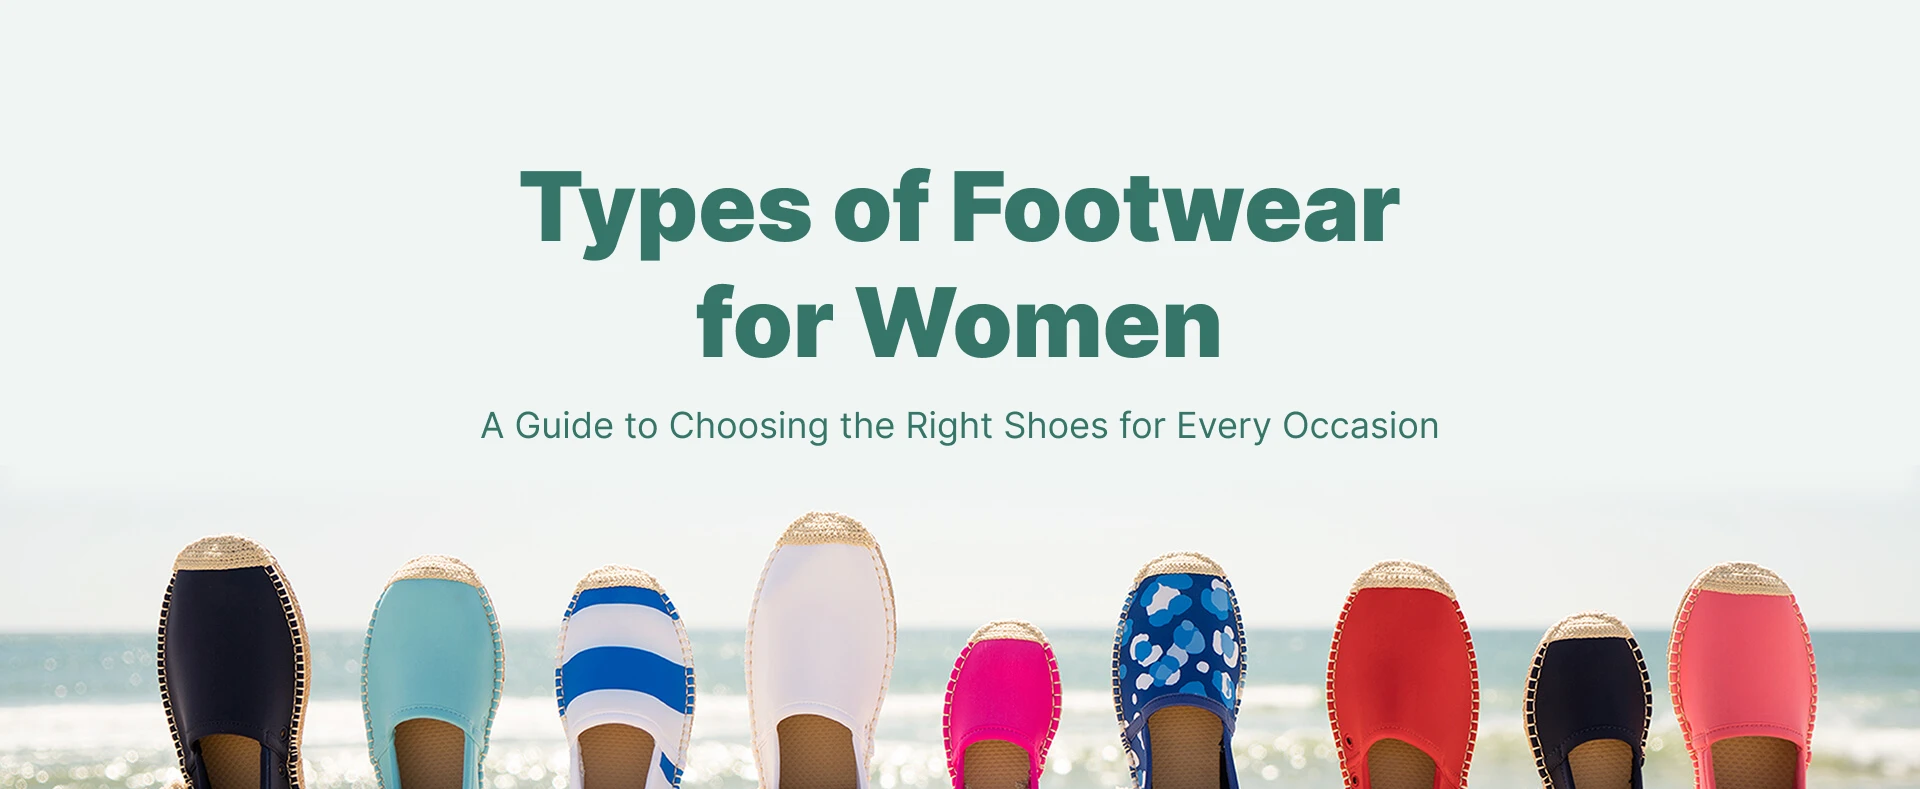 Types of Footwear for Women: A Guide to Choosing the Right Shoes for Every Occasion